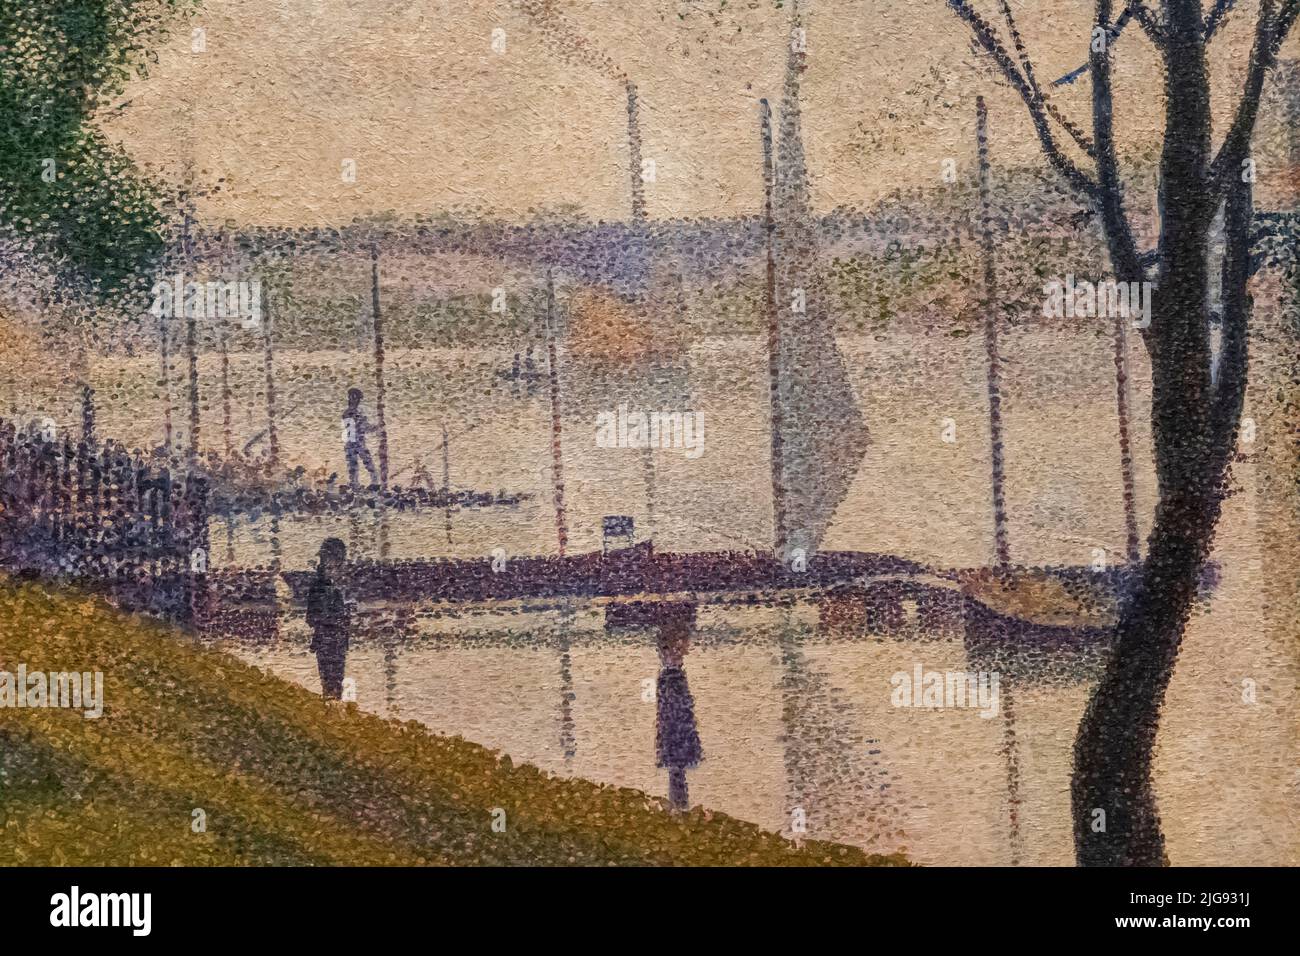 Inghilterra, Londra, Somerset House, The Courtauld Gallery, dipinto dal titolo "The Bridge at Courbevoie" di Georges Seurat del 1886 Foto Stock